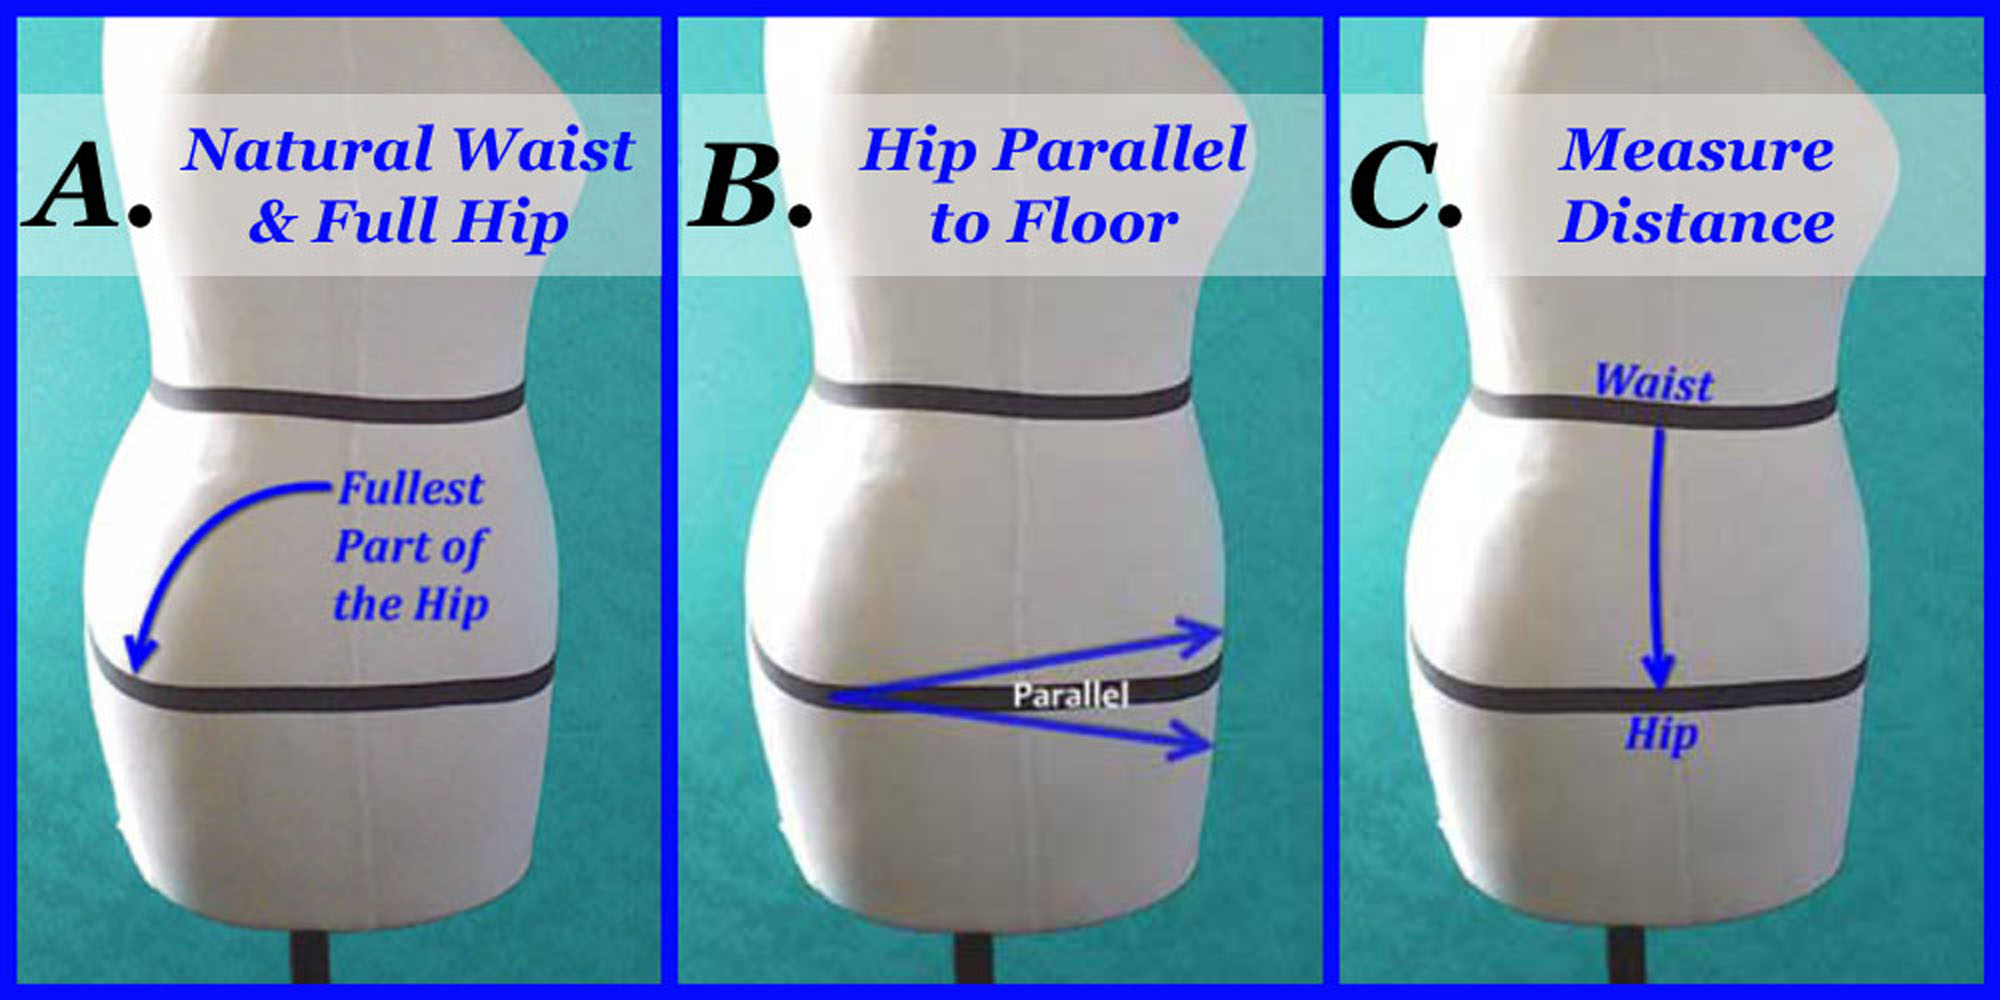 Updated : Making A Perfect Fit Skirt Using The Hip Allocation Method ,  Detailed Steps 